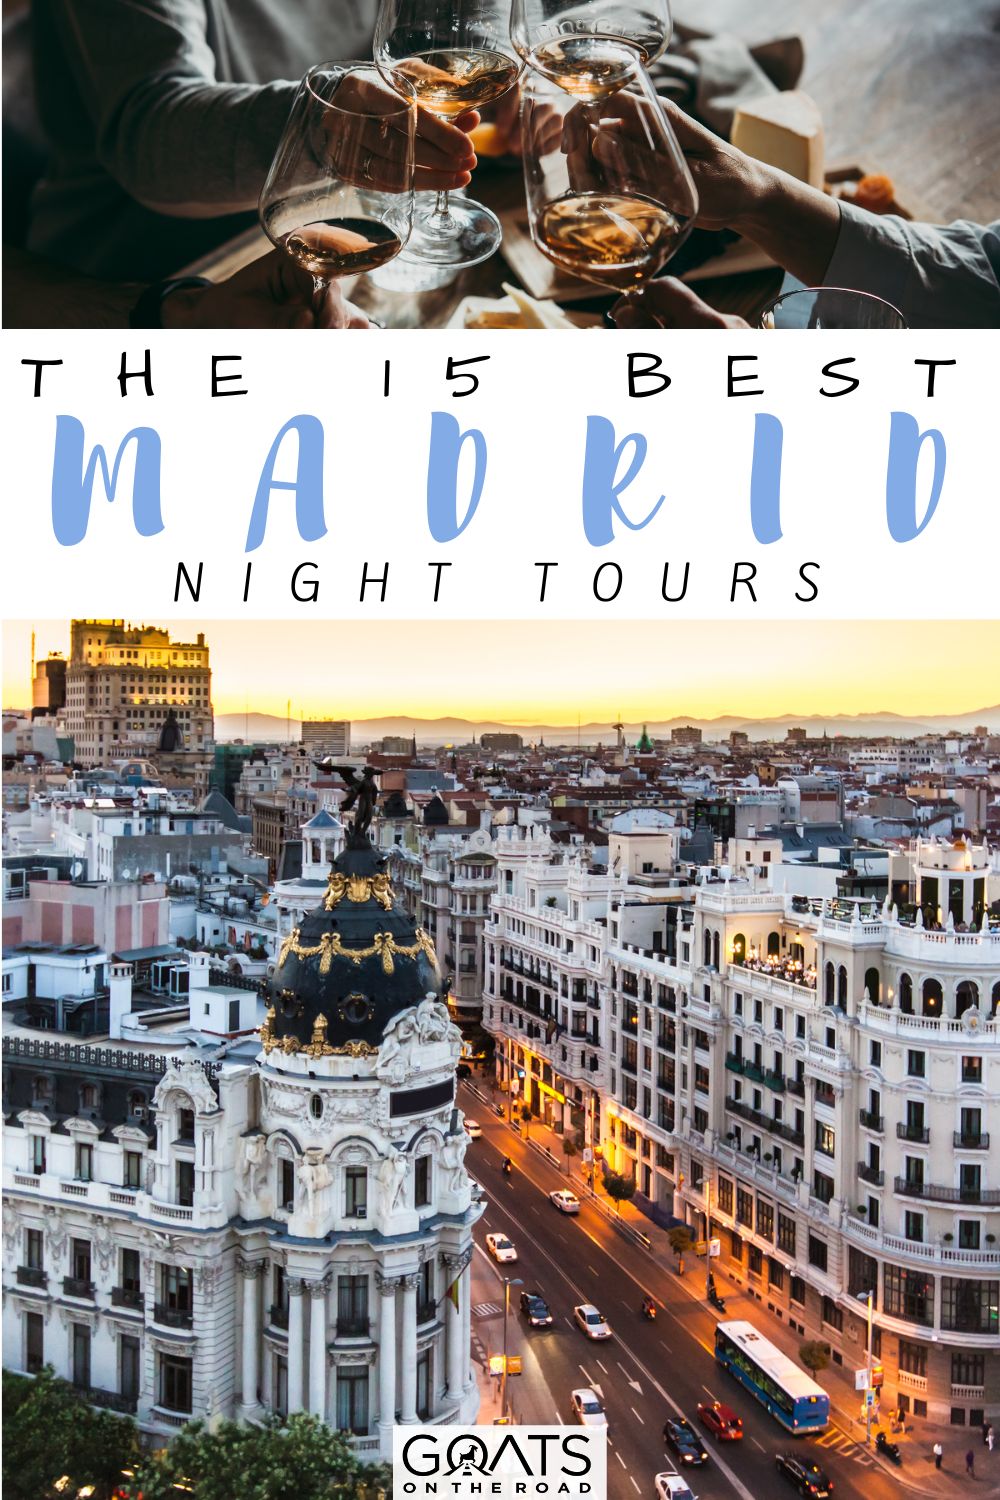 “THE 15 BEST Madrid Night Tours